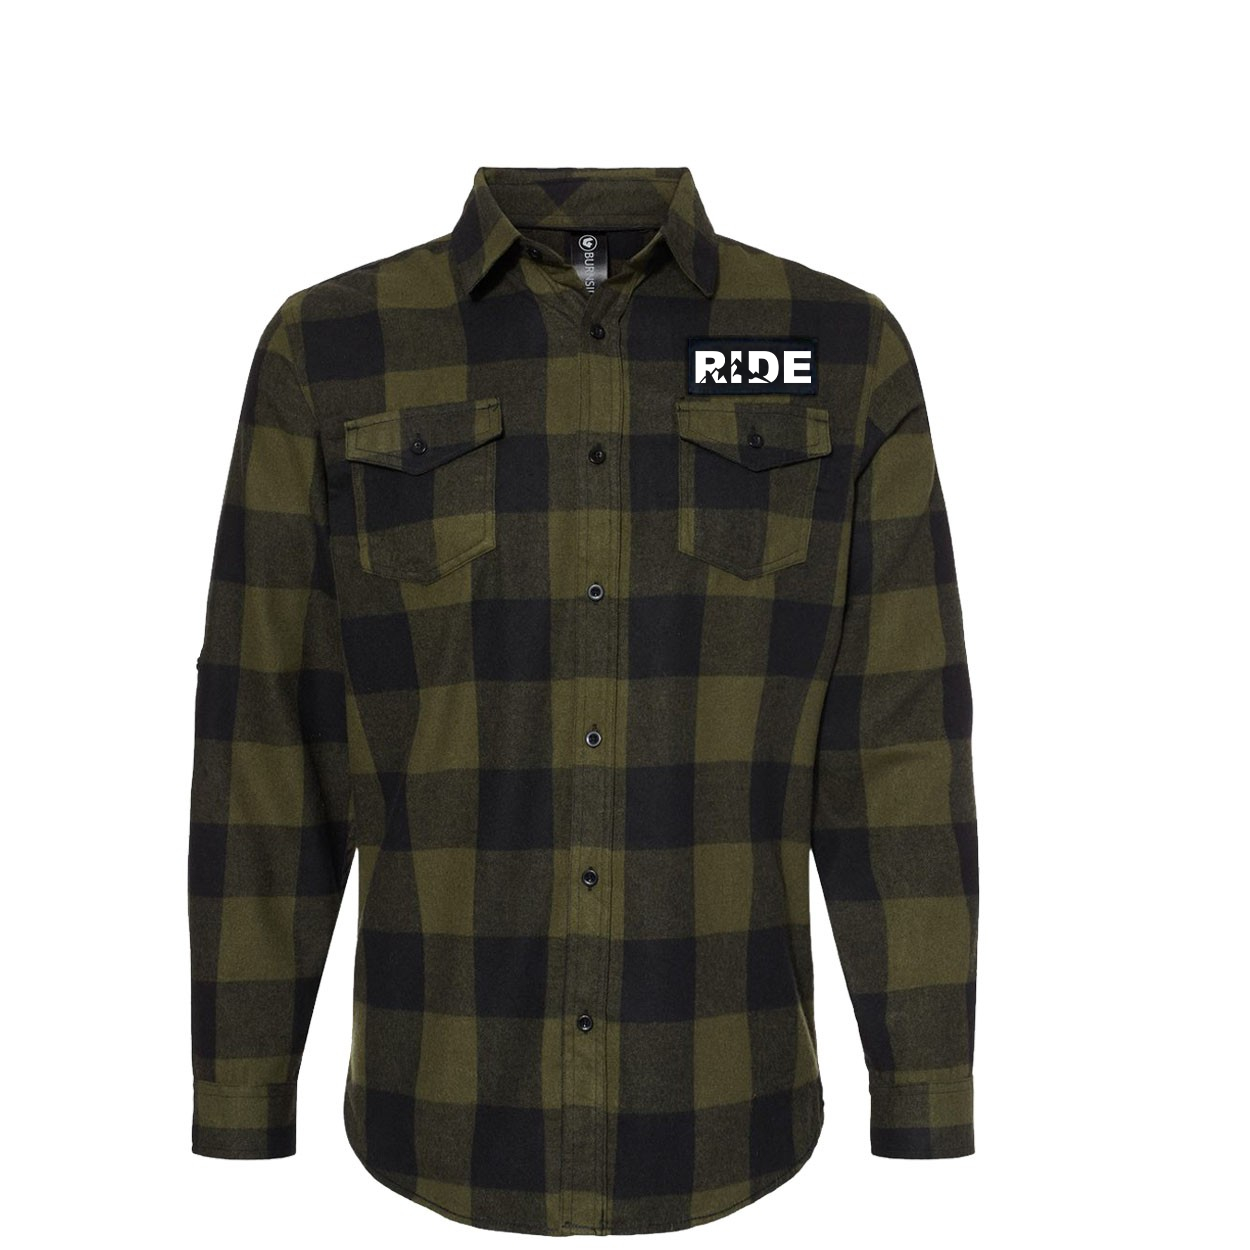 Ride Mountain Logo Classic Unisex Long Sleeve Woven Patch Flannel Shirt Army/Black (White Logo)